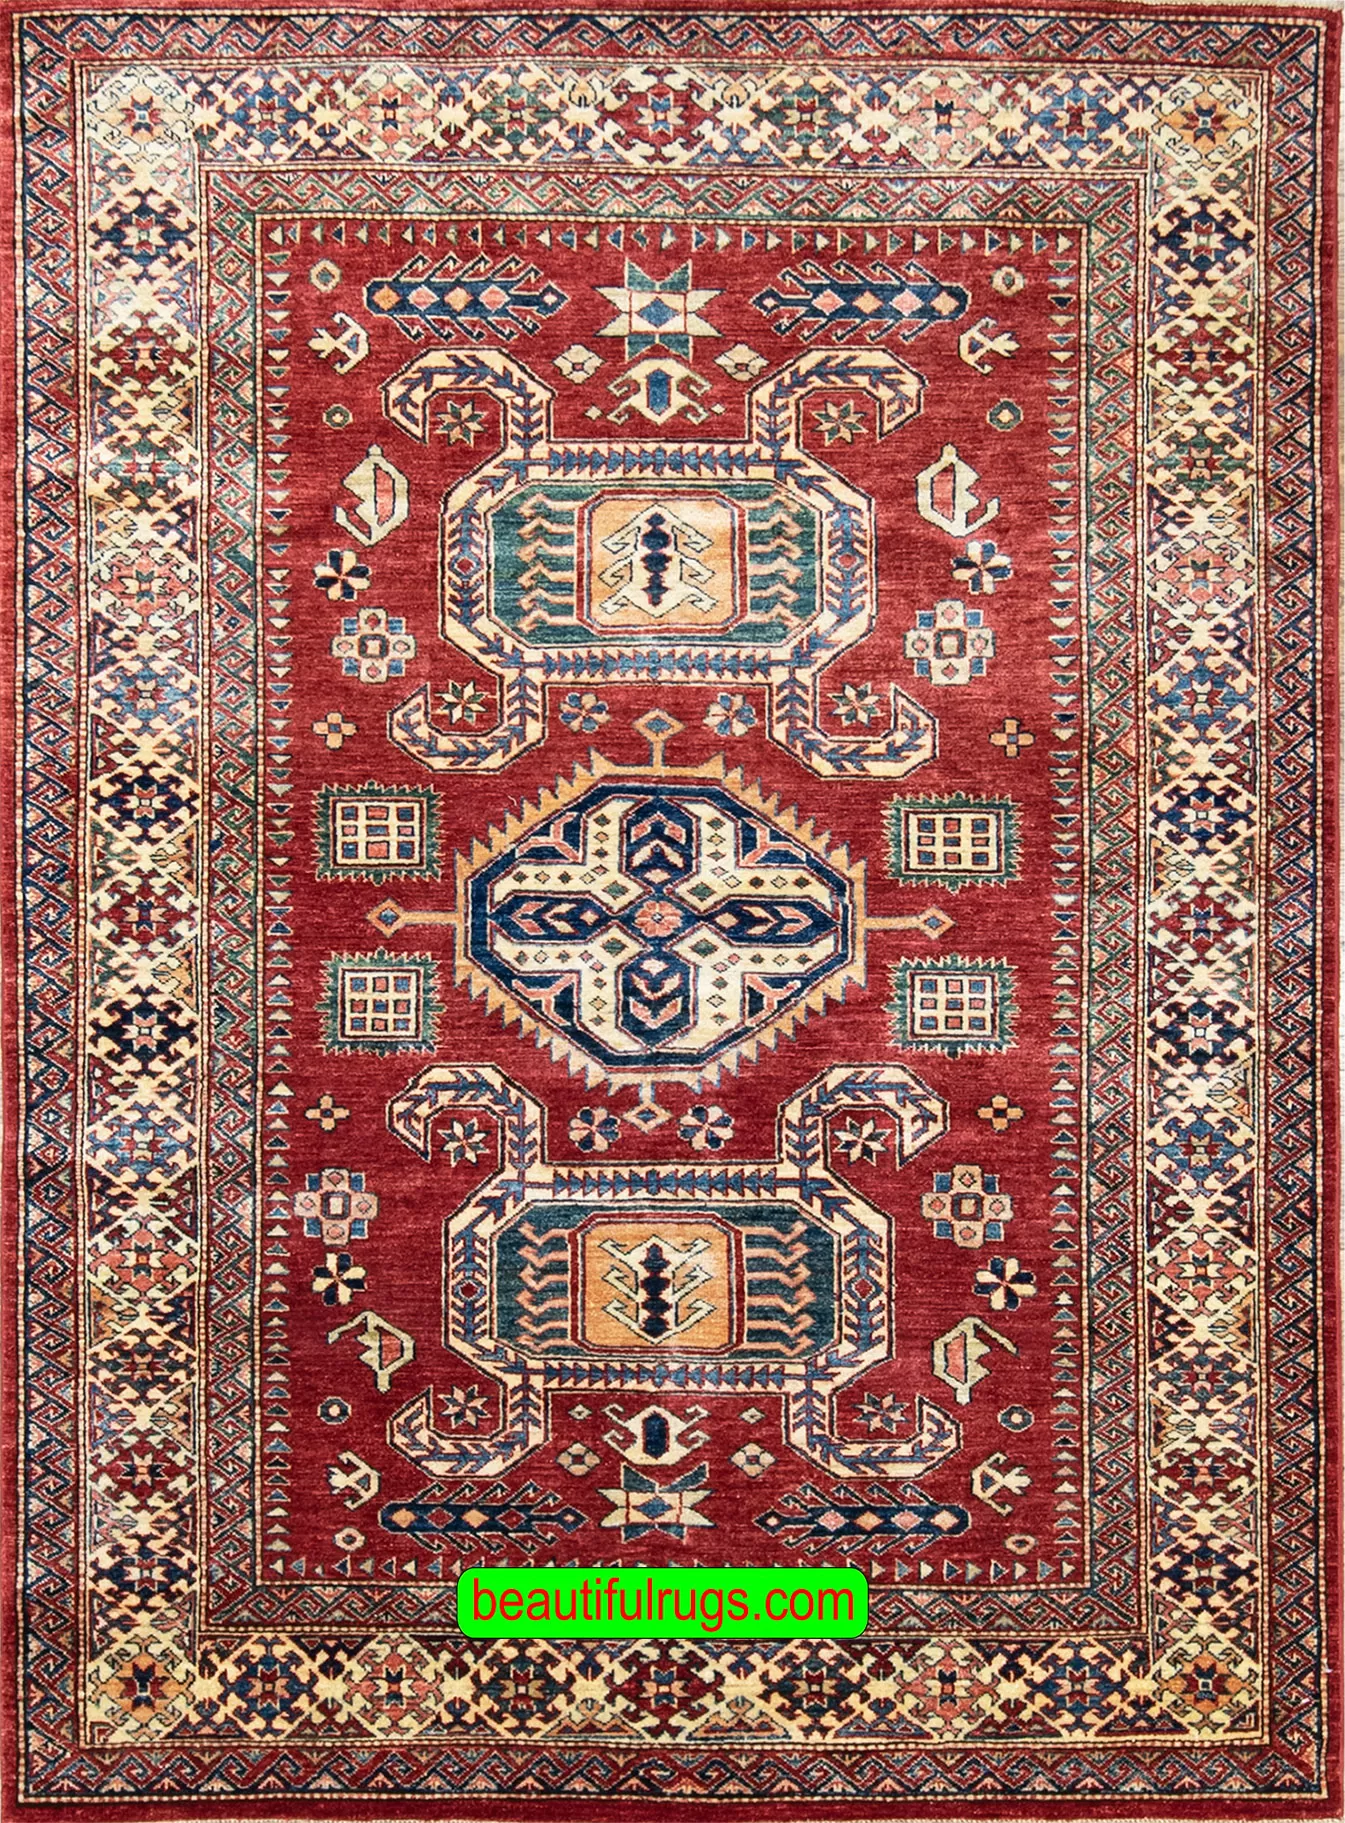 Area rug for sale, hand knotted super Kazak rug in red color. Size 5.8x7.9.